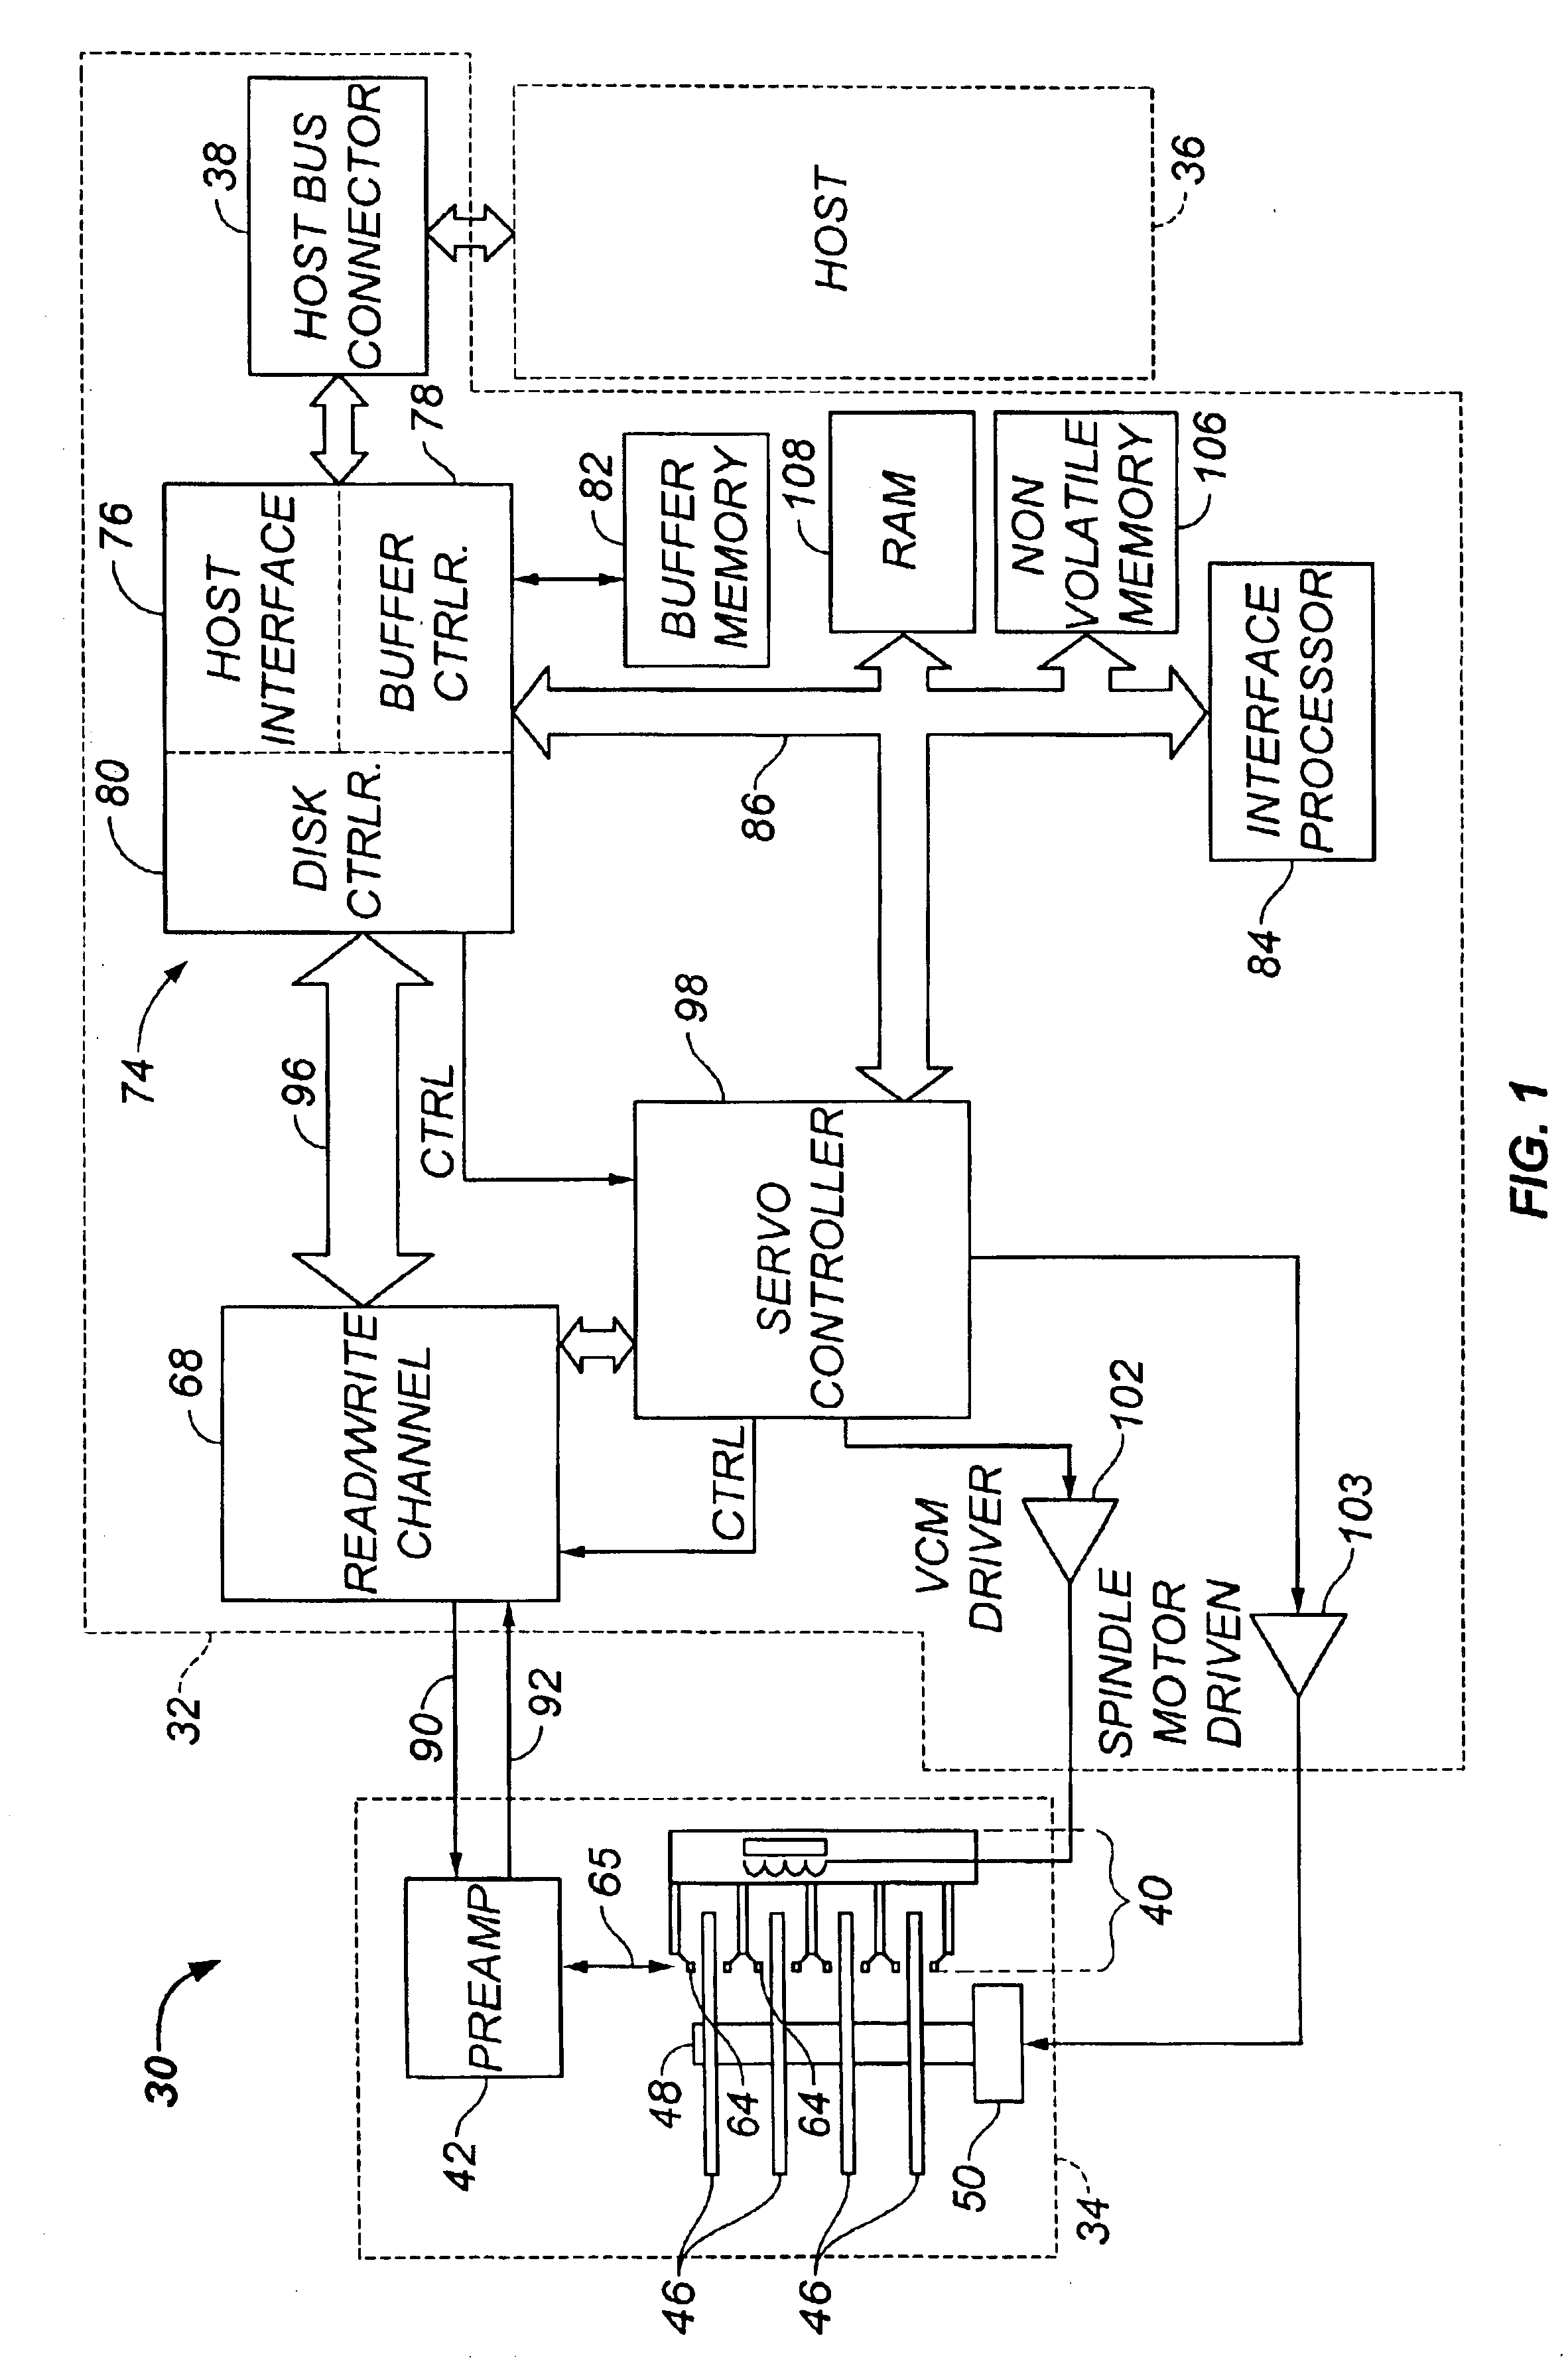 Repeatable runout determination within a rotating media storage device